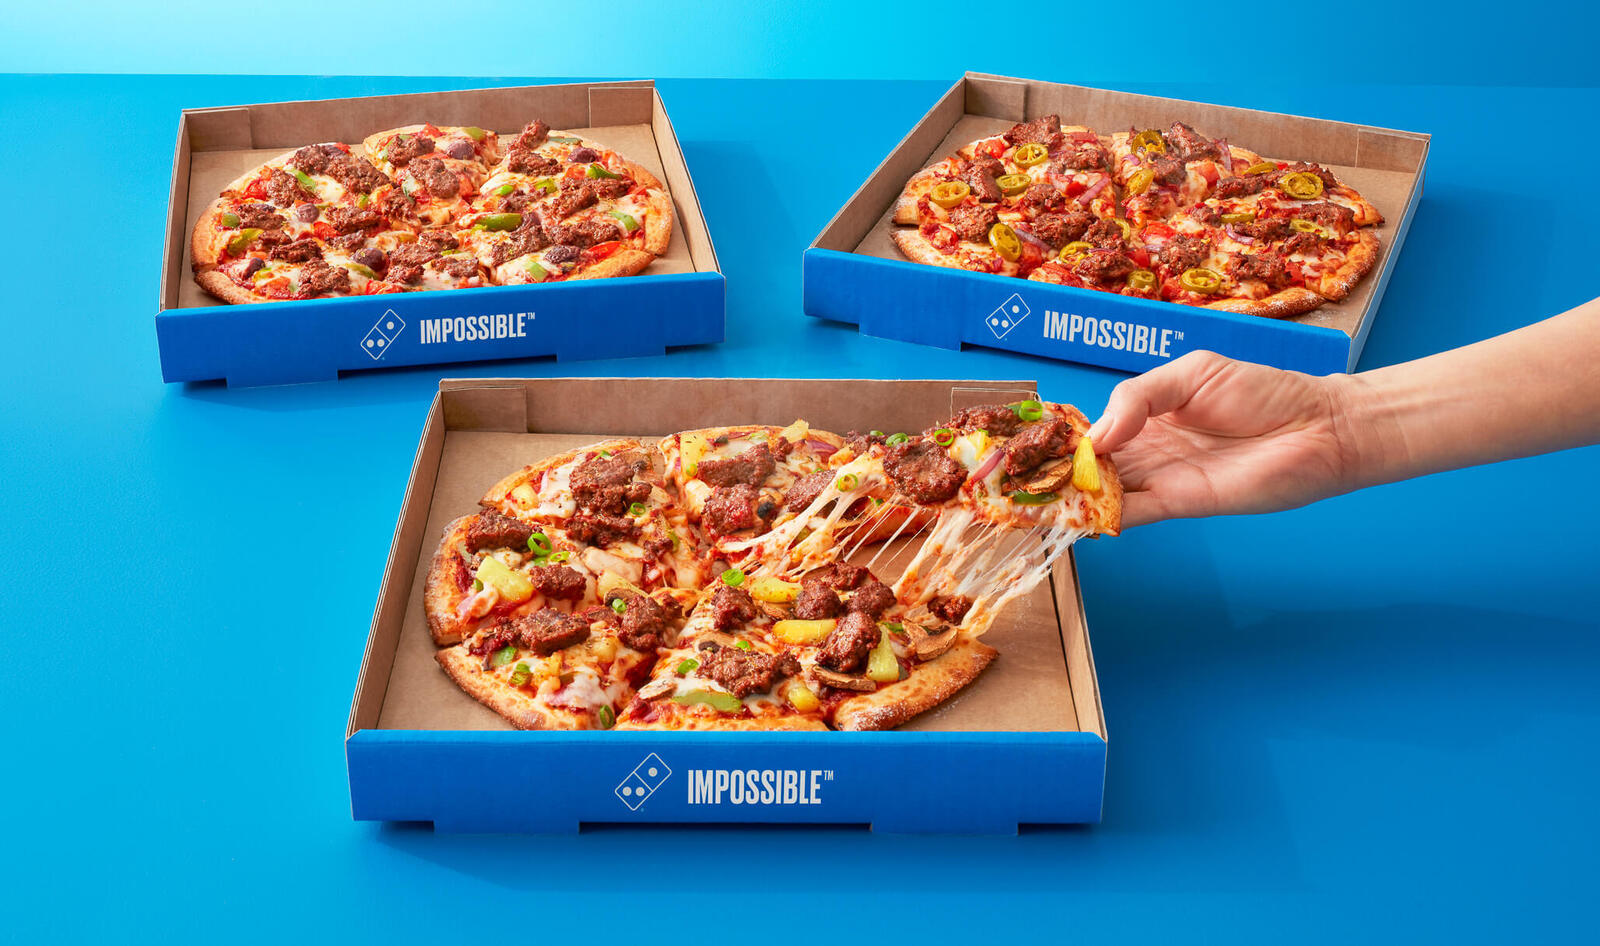 While You Were Sleeping, Impossible Foods Took Over 700 Domino’s